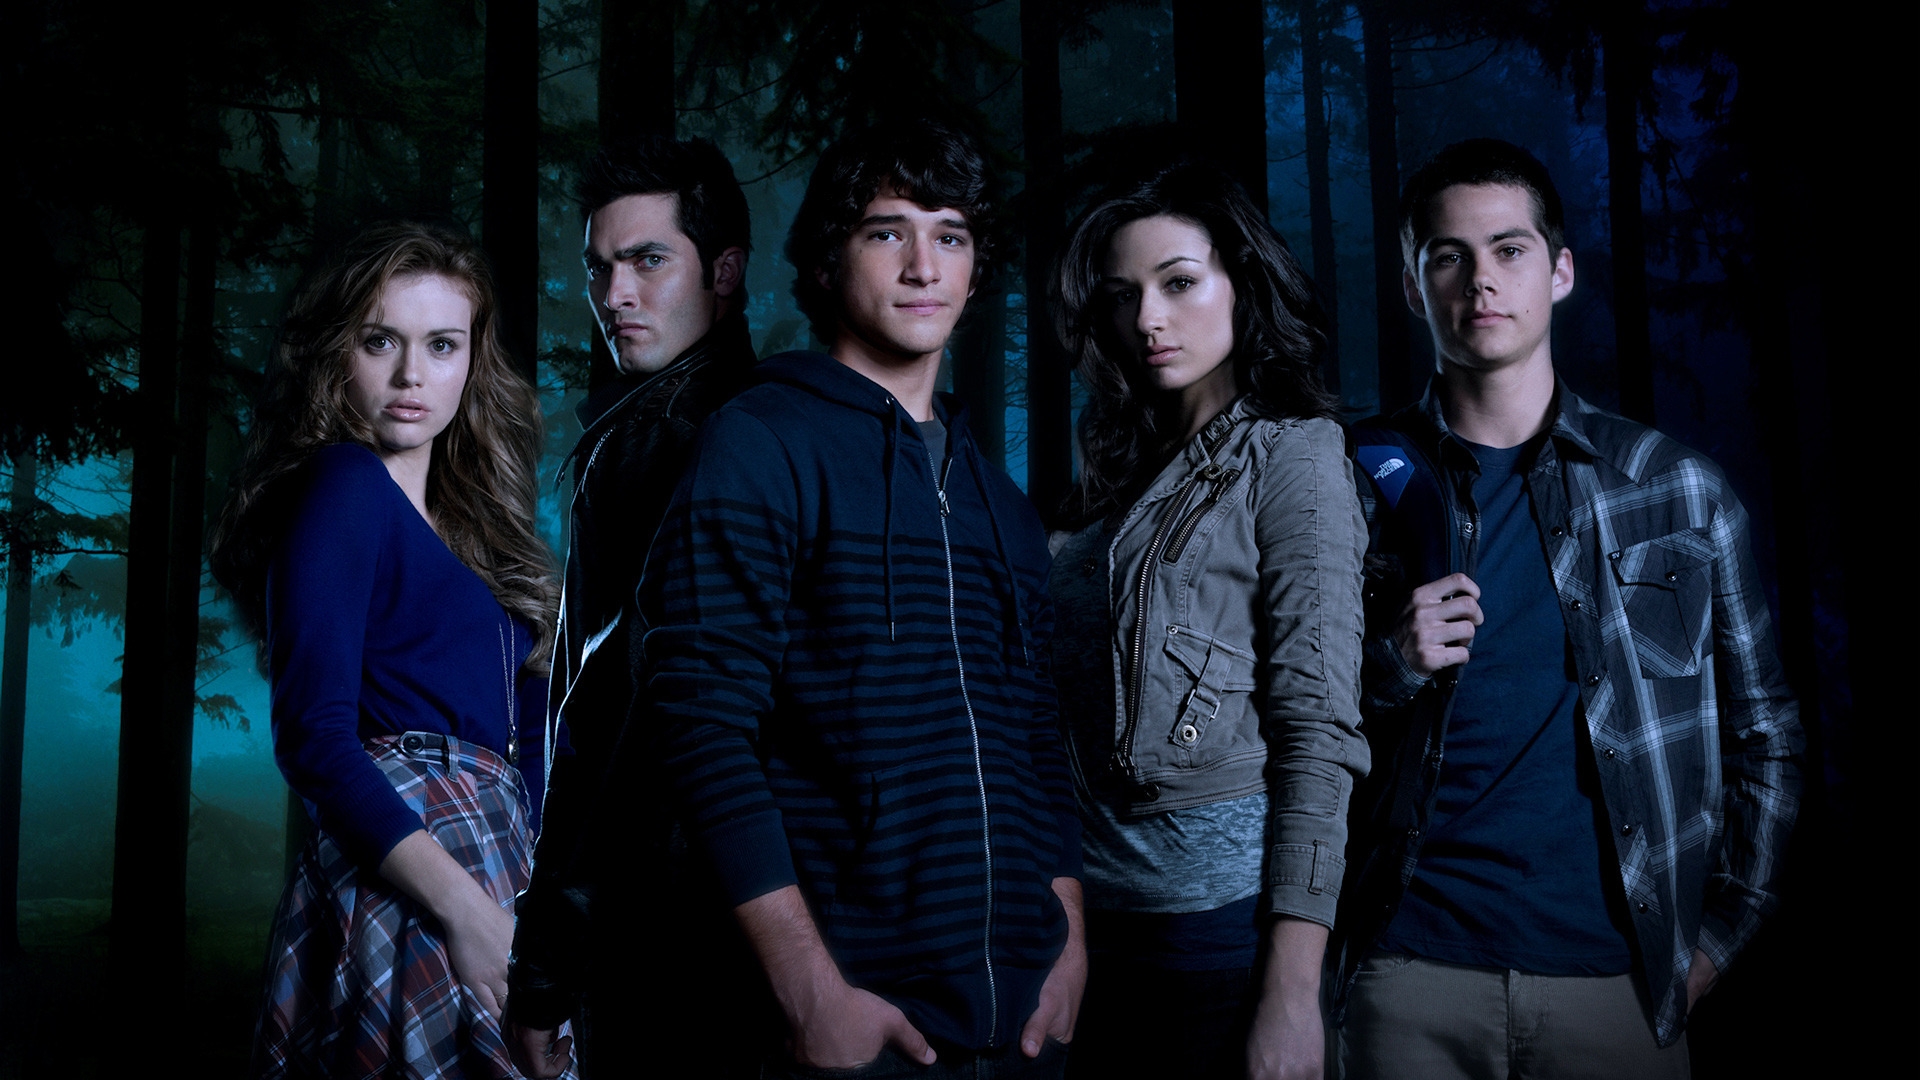 Teen Wolf Cast for 1920 x 1080 HDTV 1080p resolution